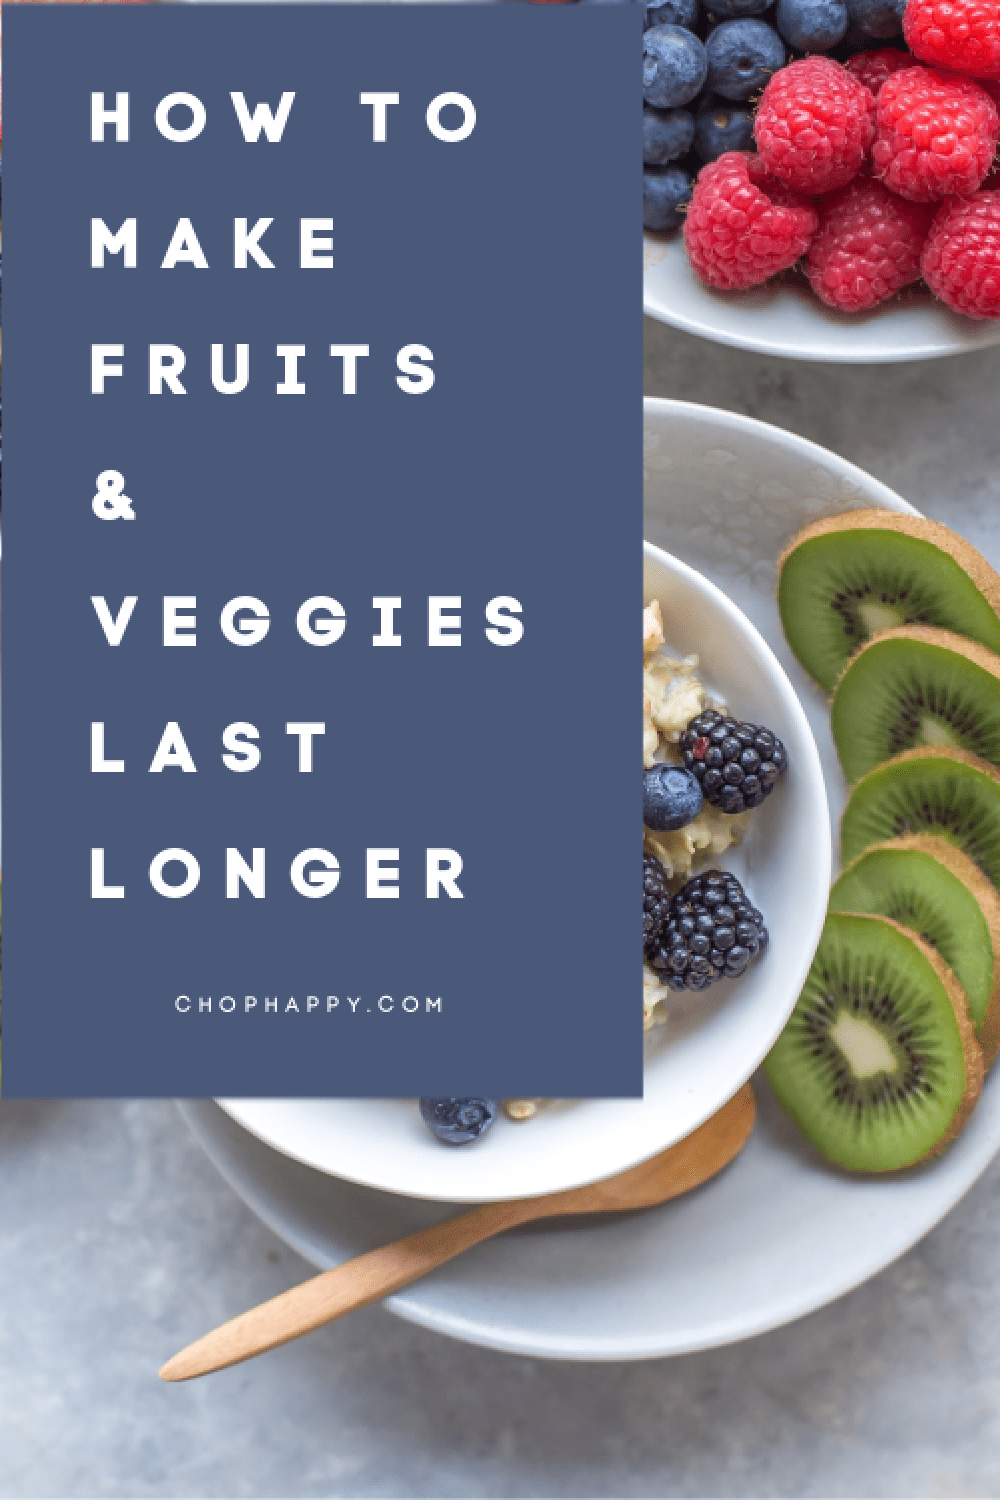 How To Make Fruits and Veggies Last Much Longer. These hacks and tips. These tips save you money in the kitchen. www.ChopHappy.com #veggies #savemoney